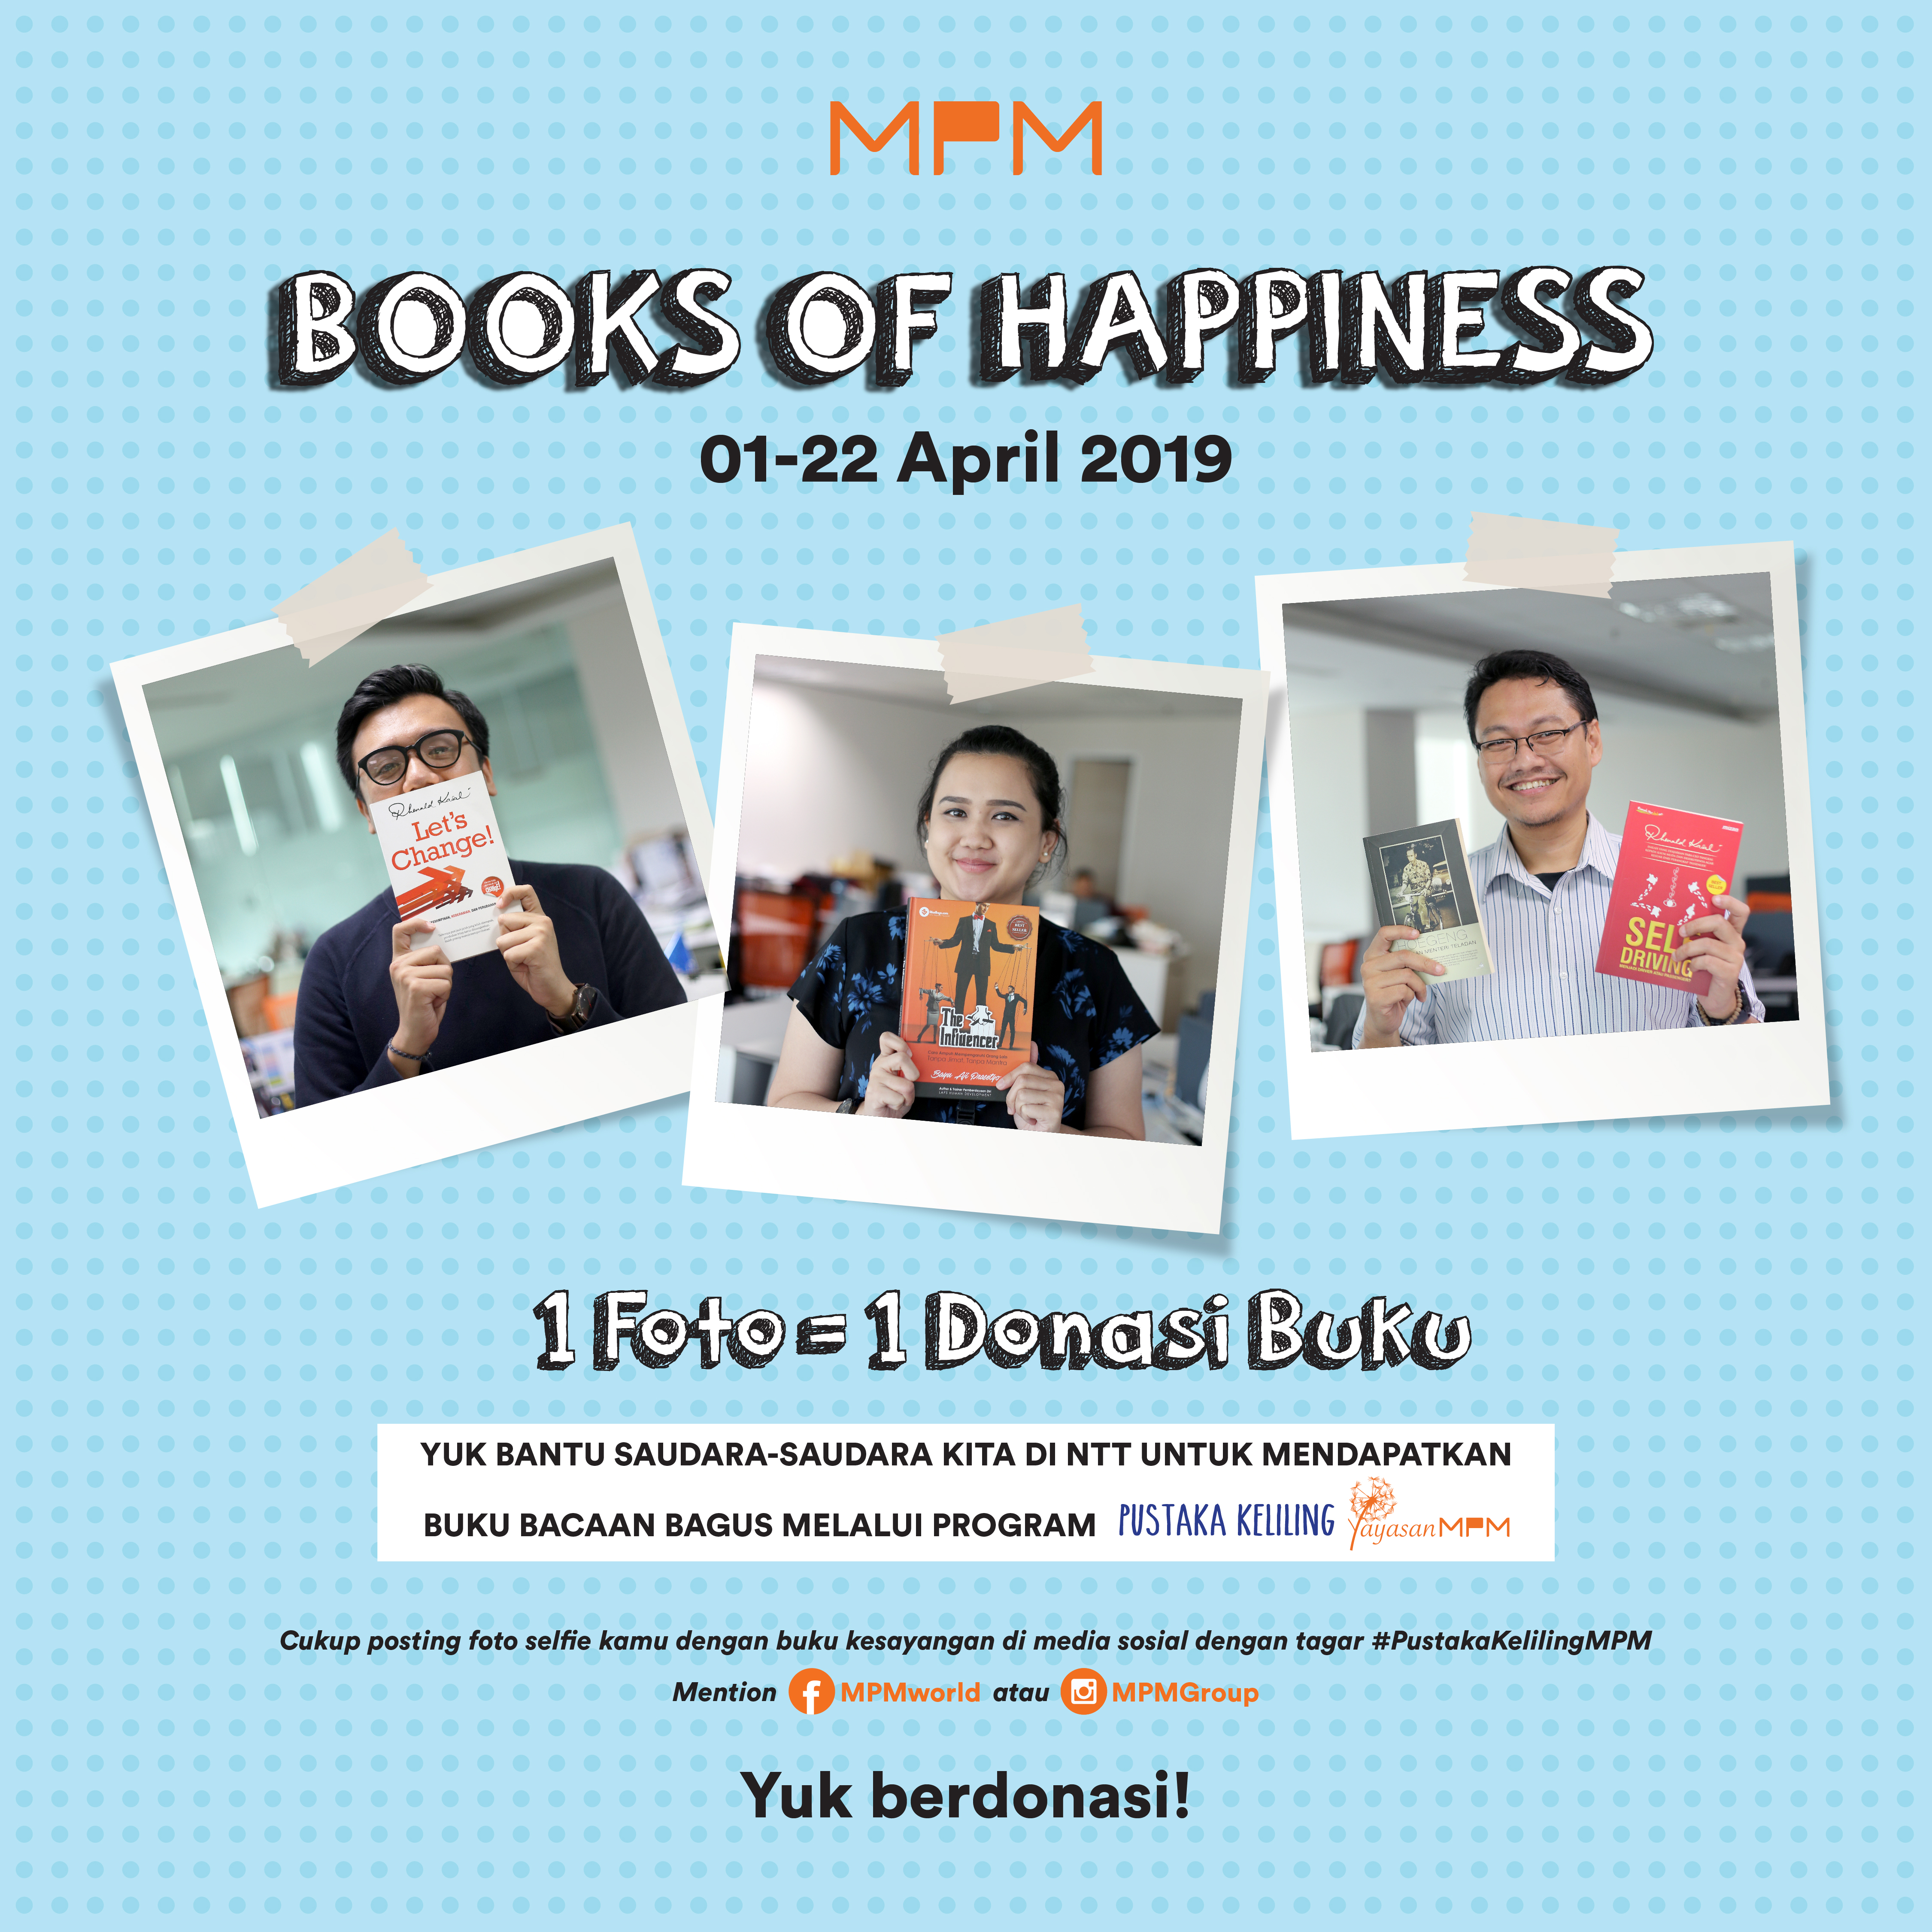 BOOKS OF HAPPINESS